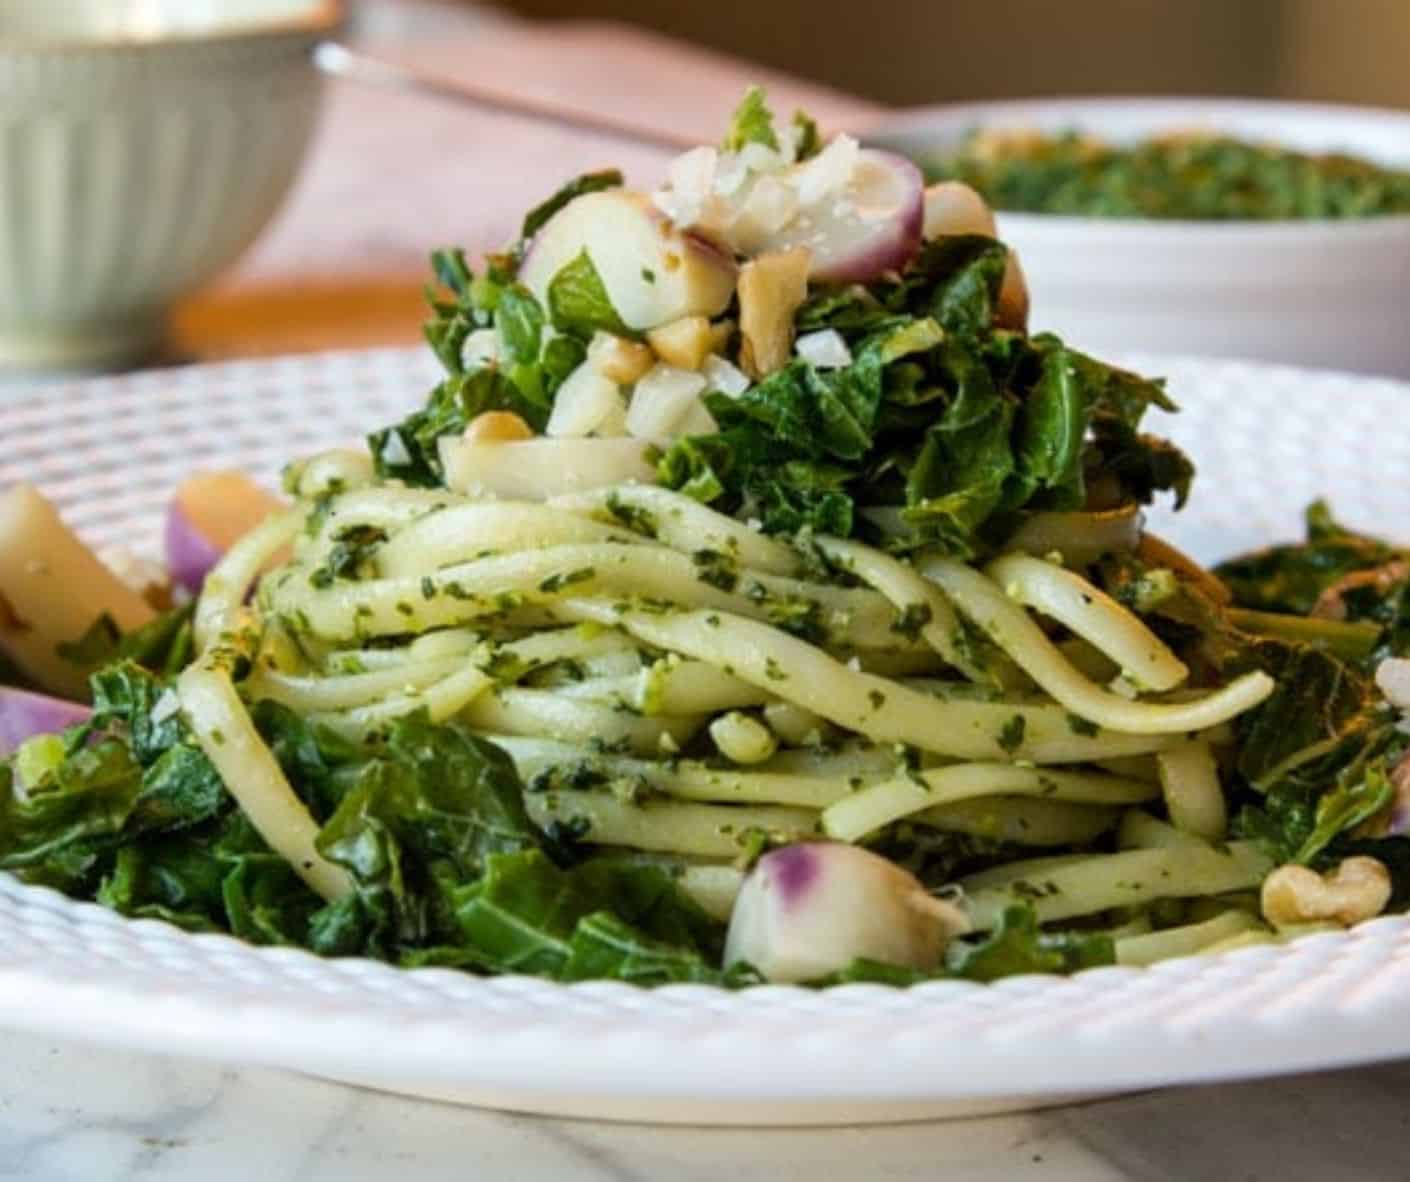 ‘Chewy’ Pasta With Succulent Arugula Pesto And Baby Turnips